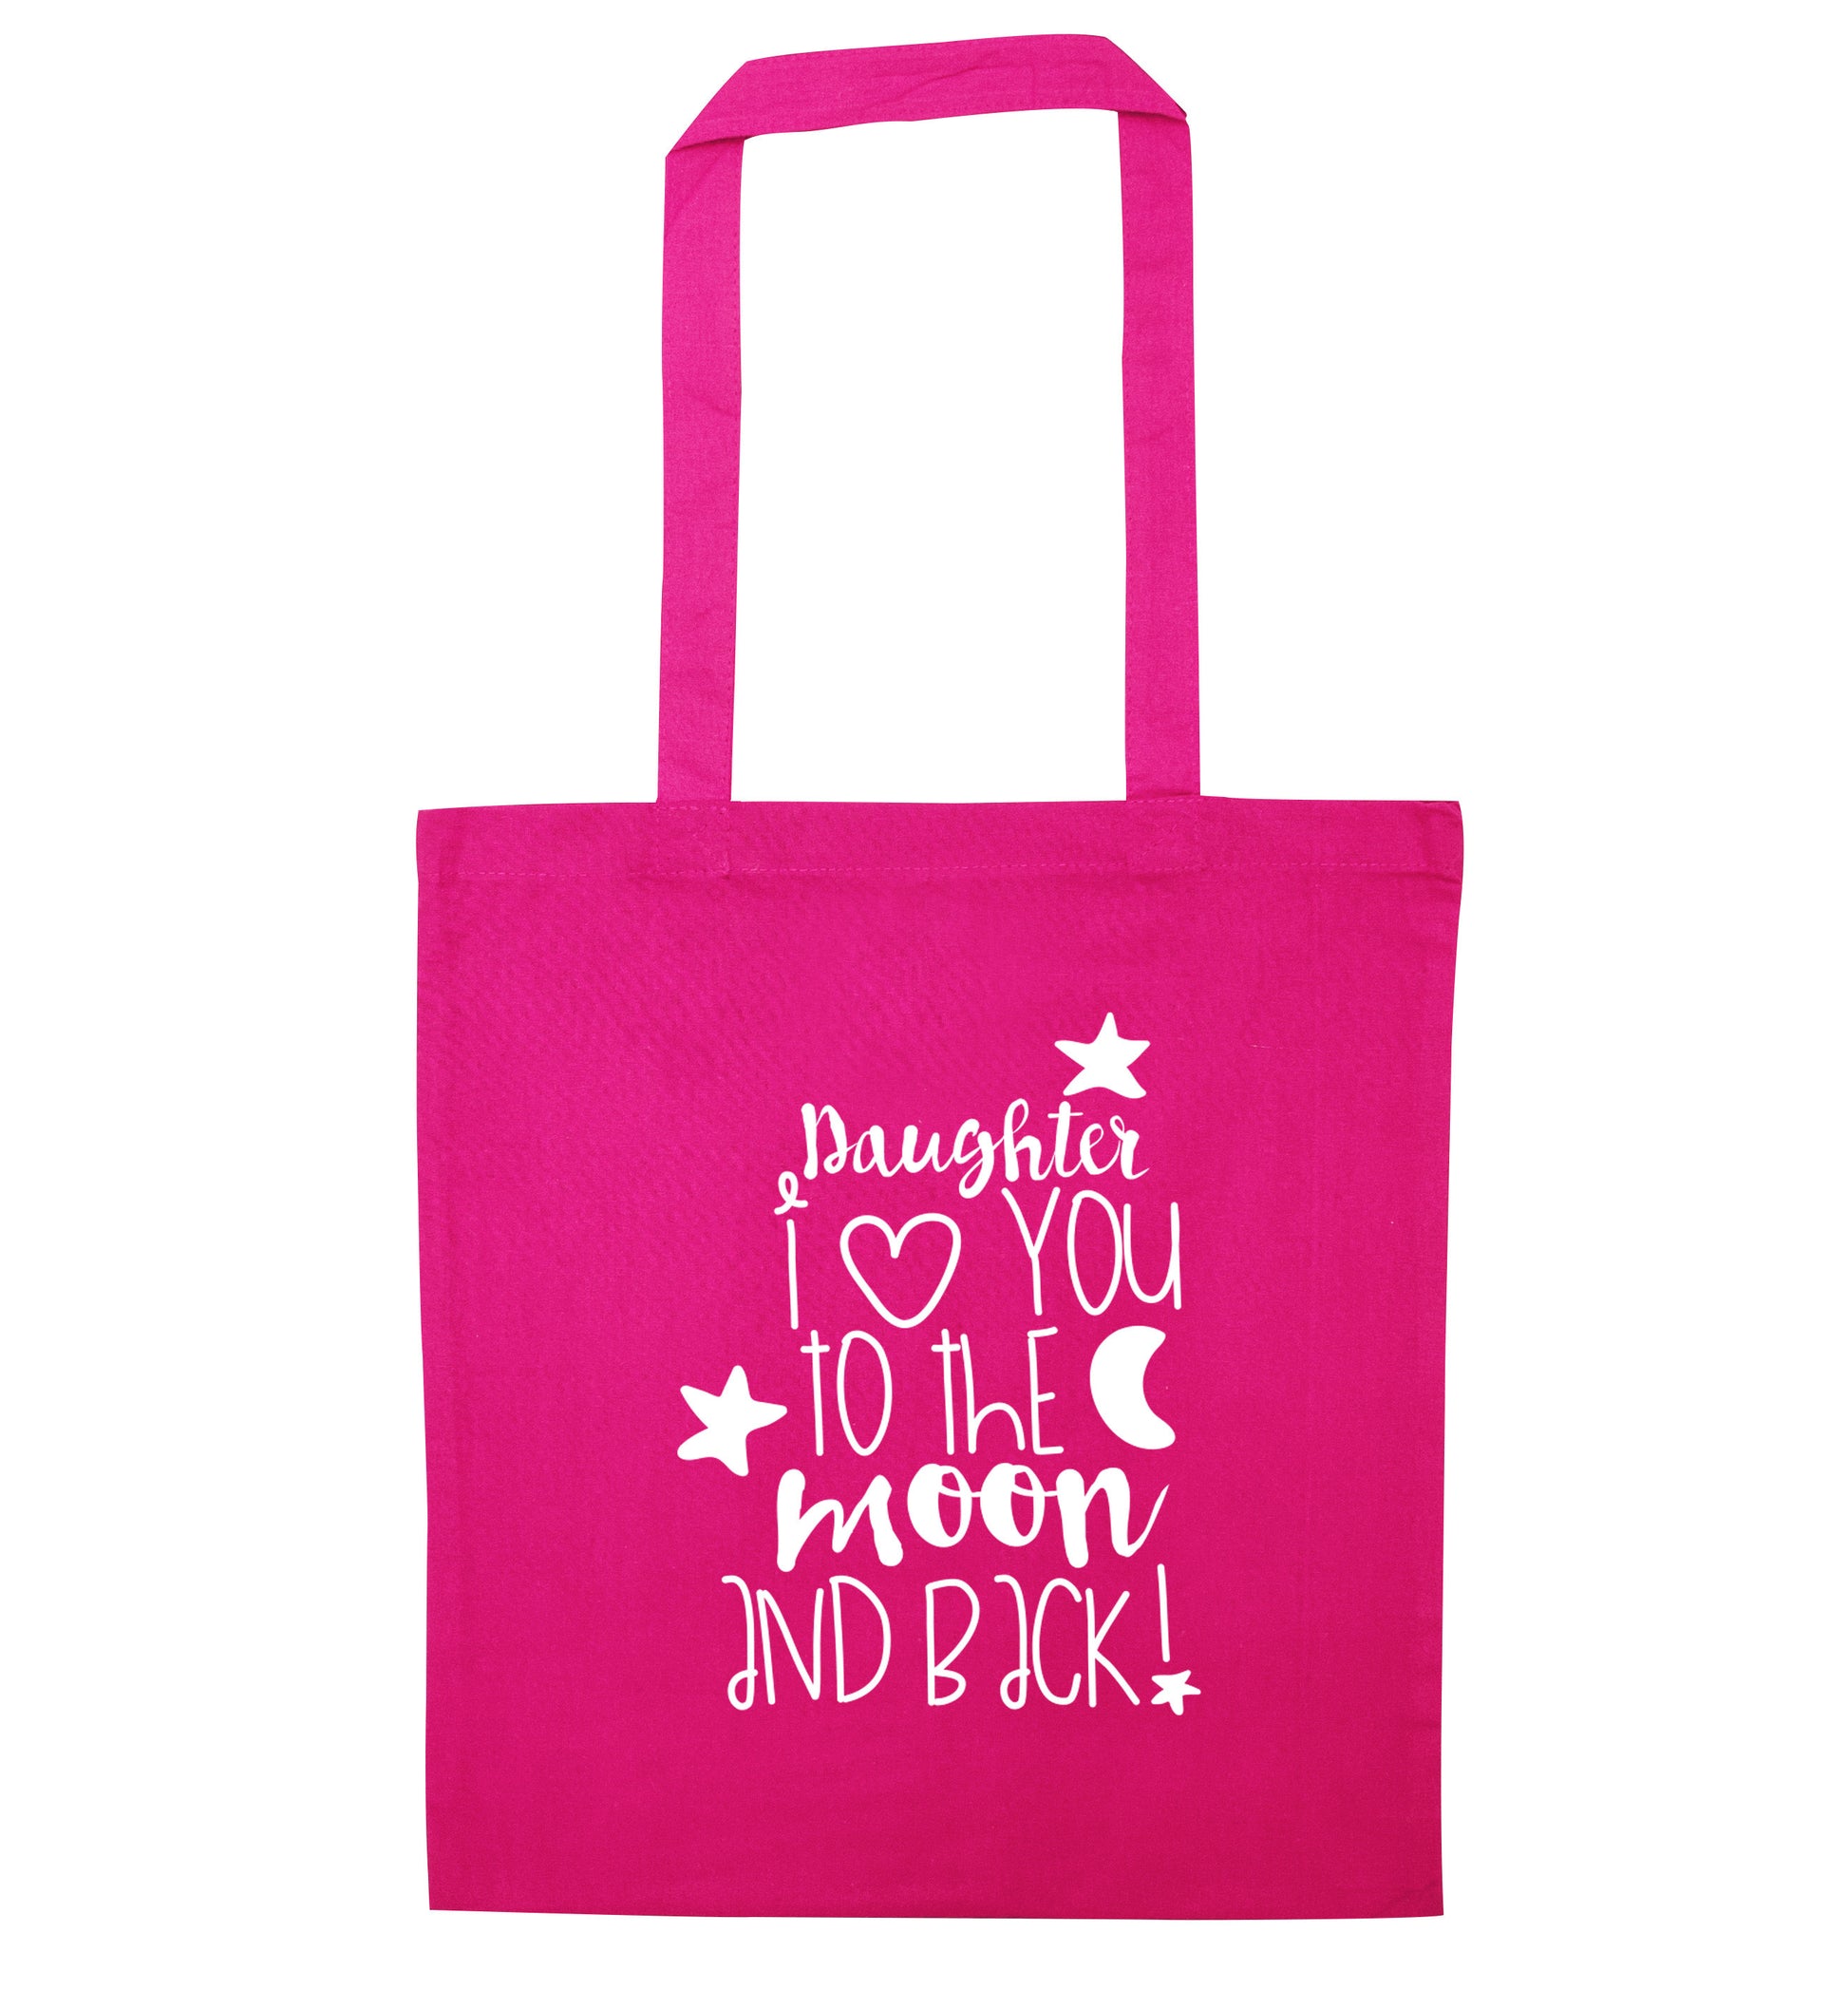 Daughter I love you to the moon and back pink tote bag